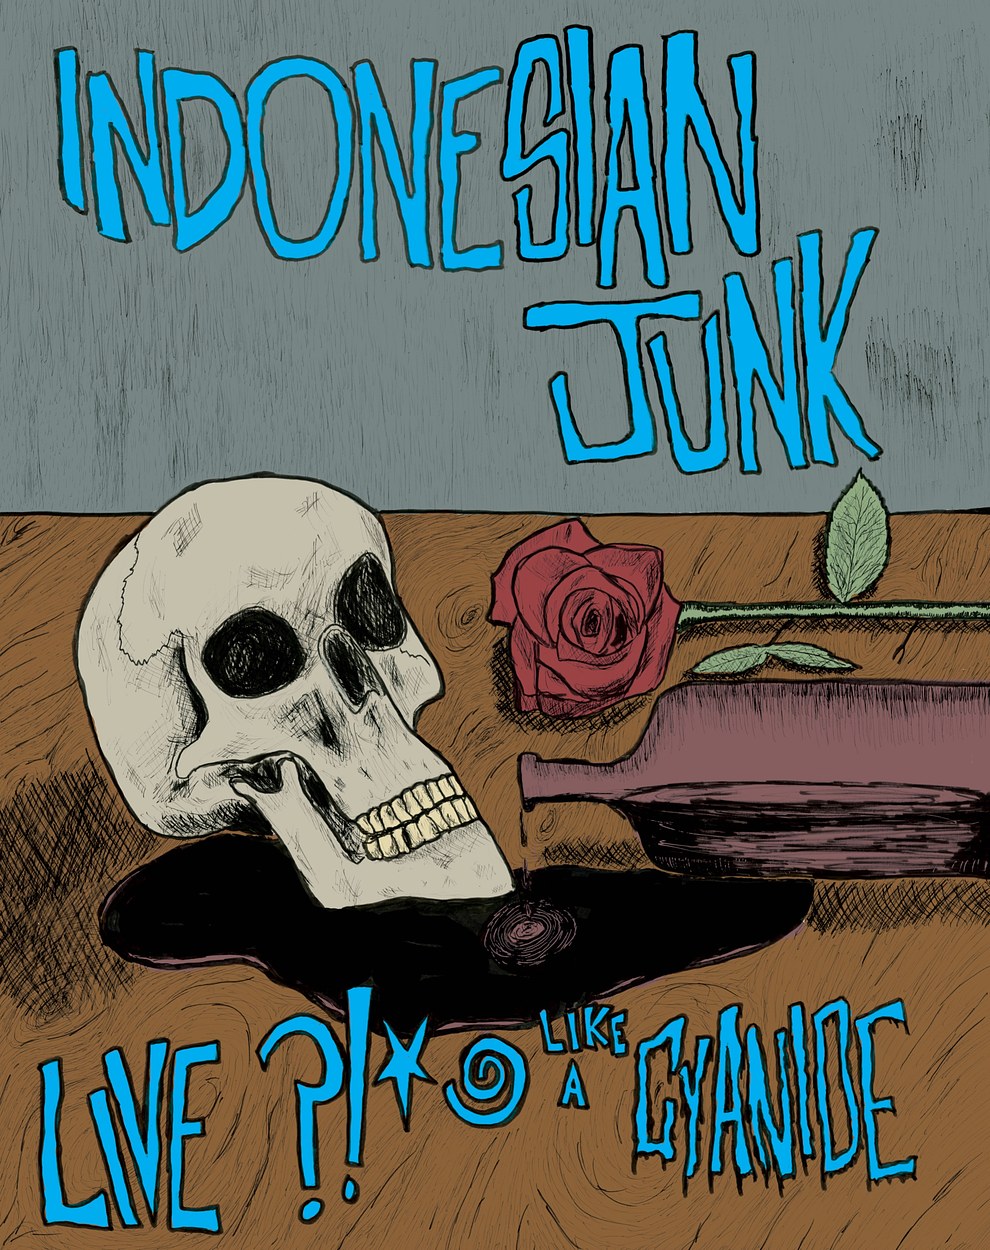 Cover of Indonesian Junk's second live tape